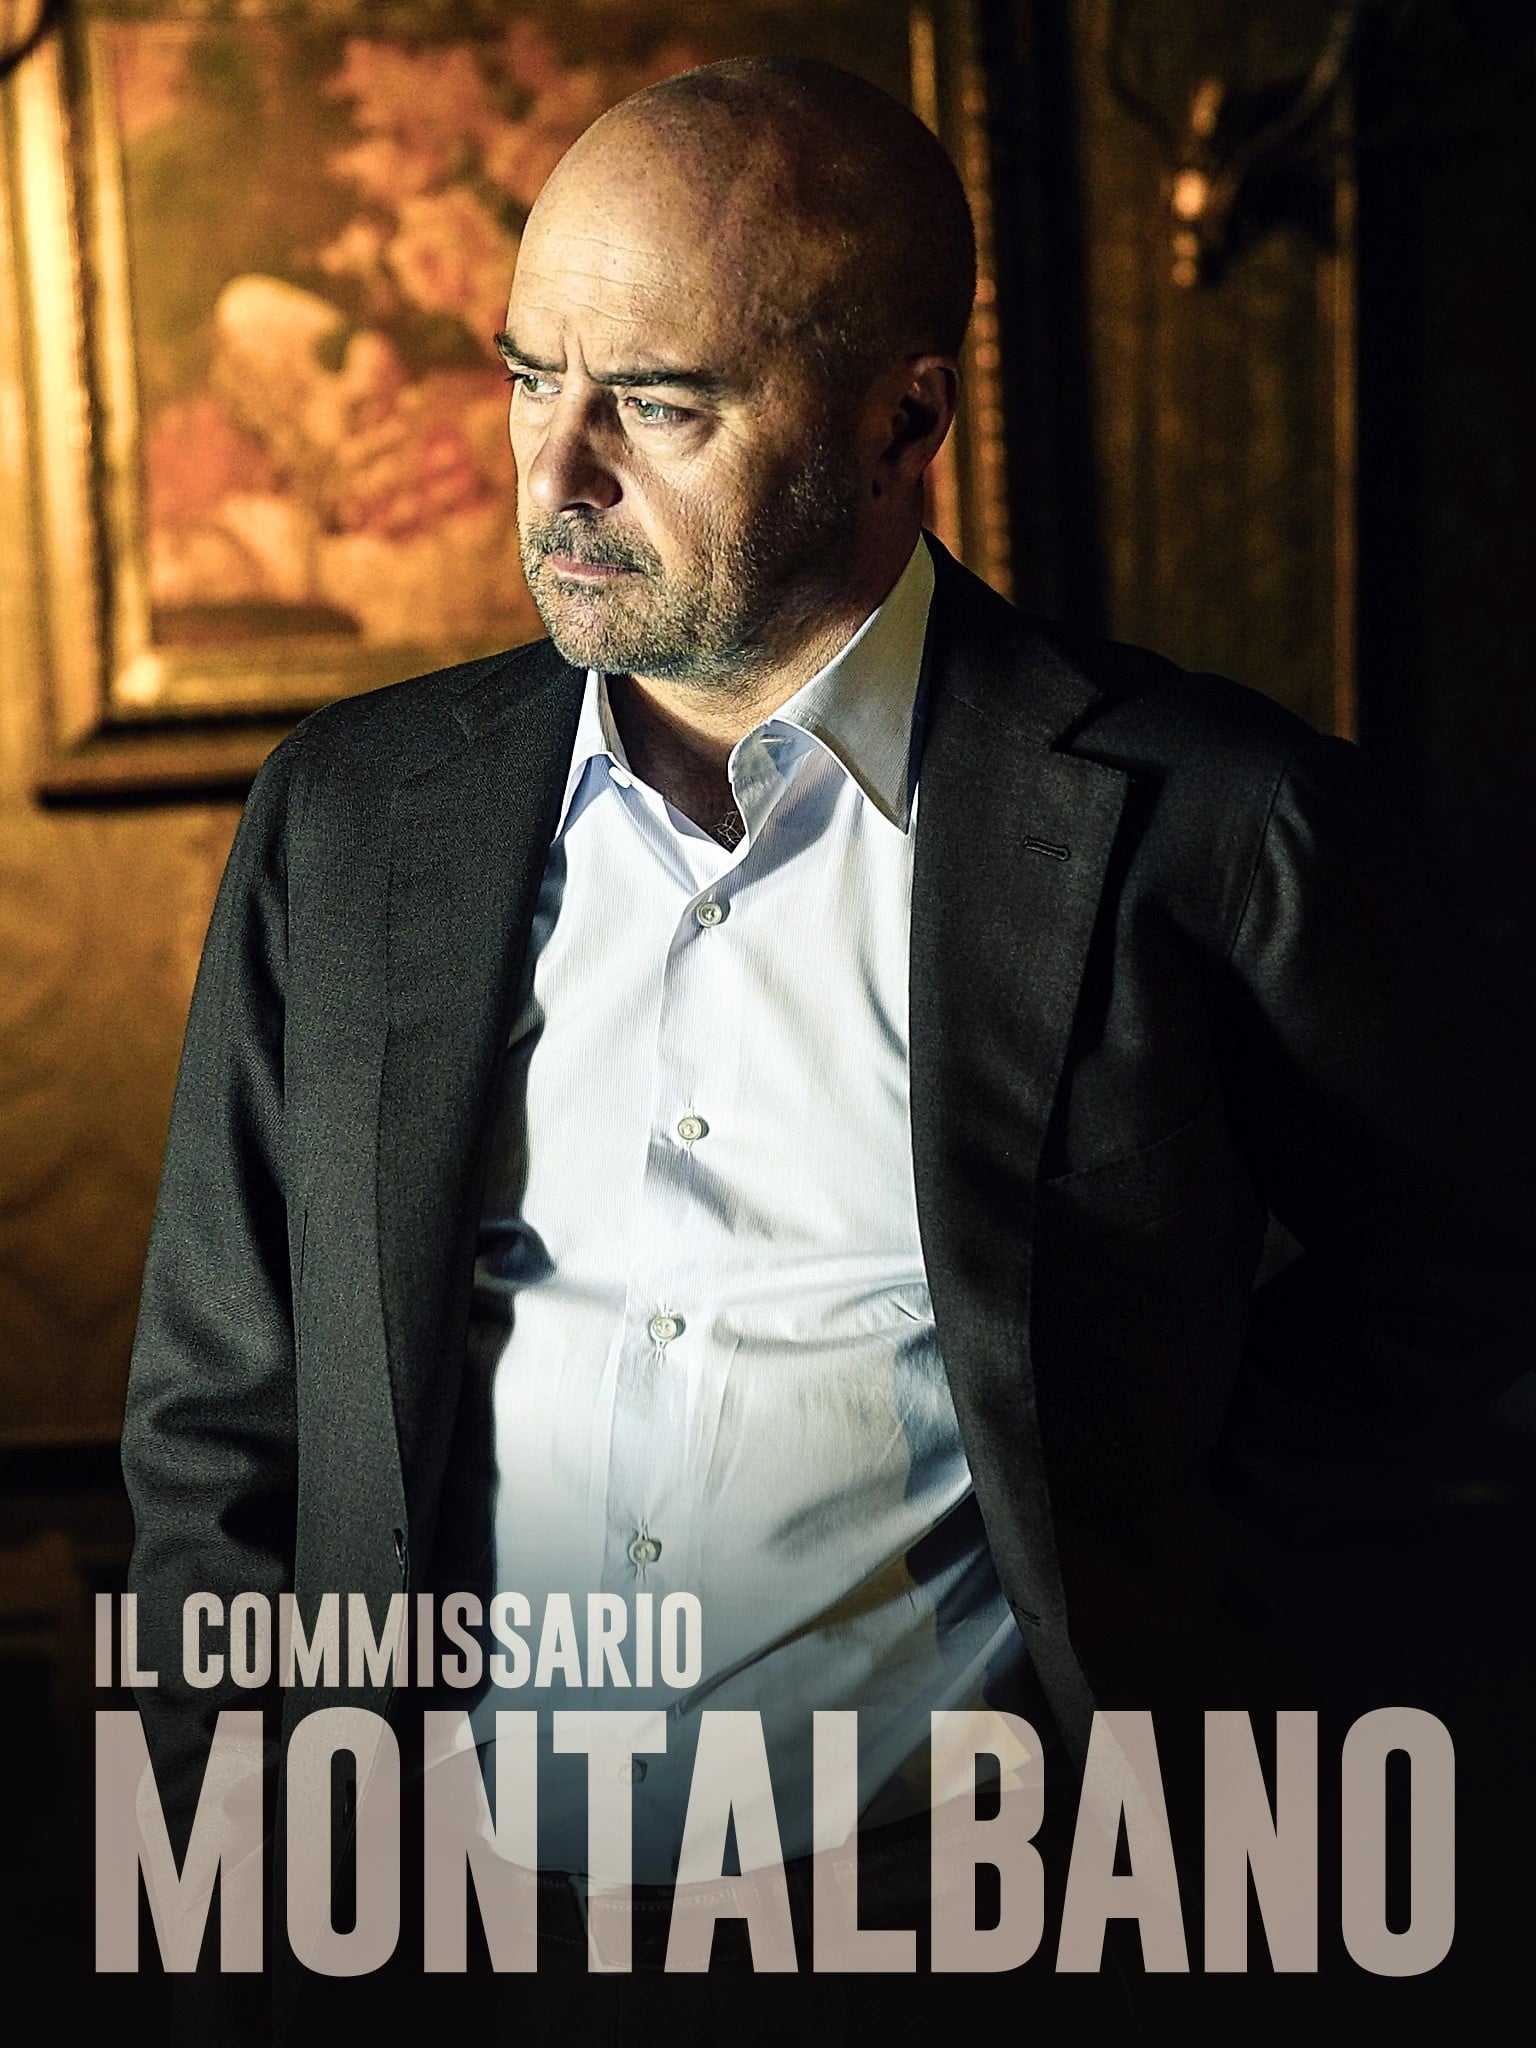 Il Commissario Montalbano in streaming